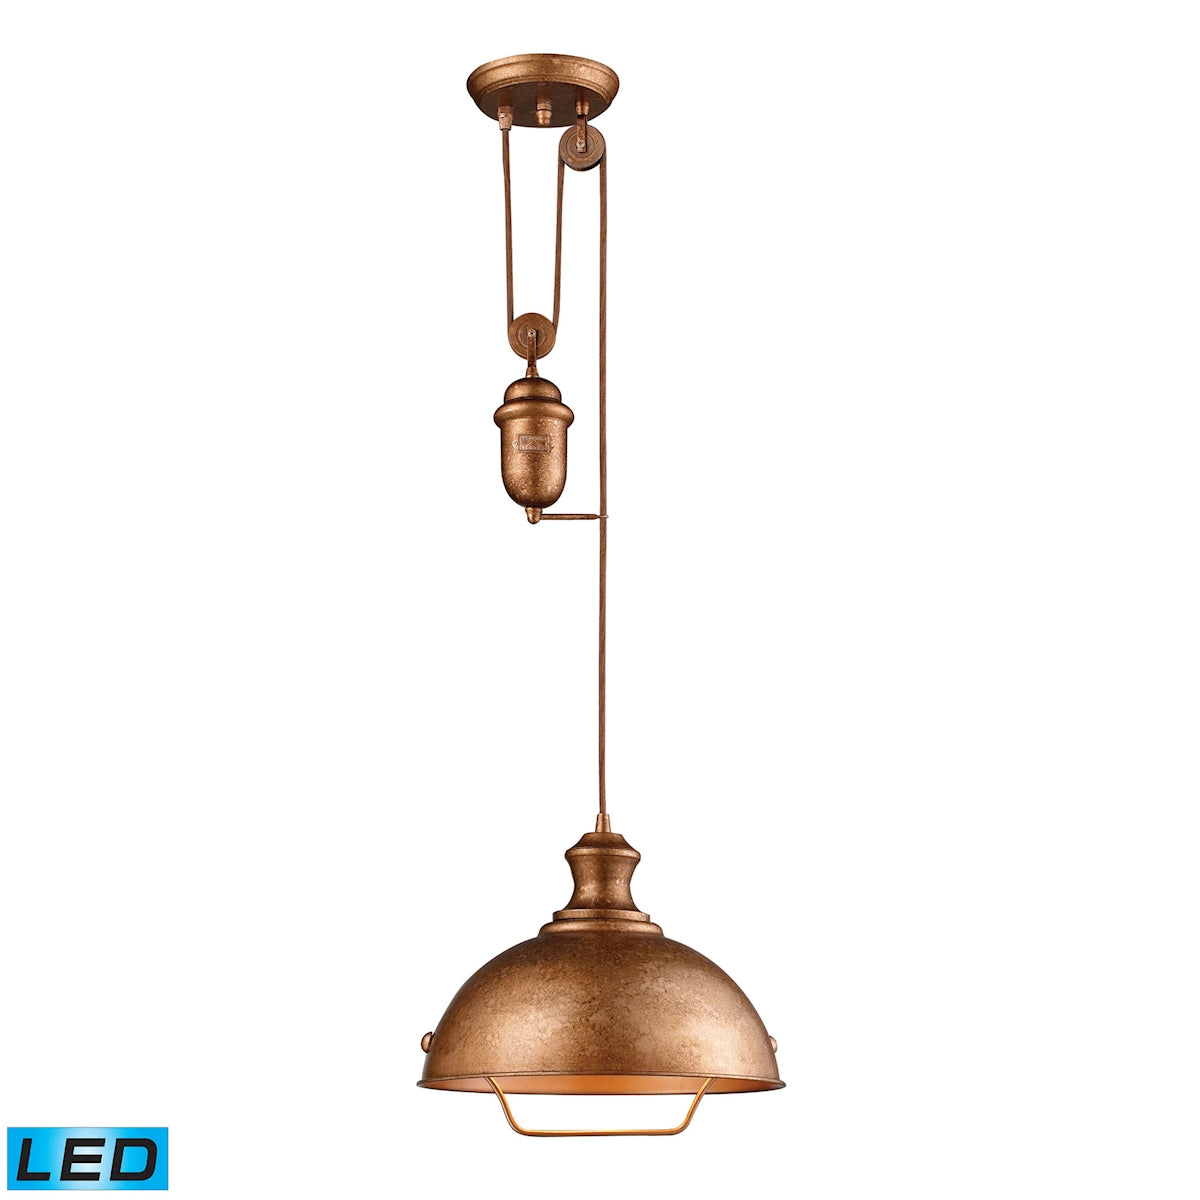 Farmhouse 1-Light Adjustable Pendant in Bellwether Copper with Matching Shade - Includes LED Bulb